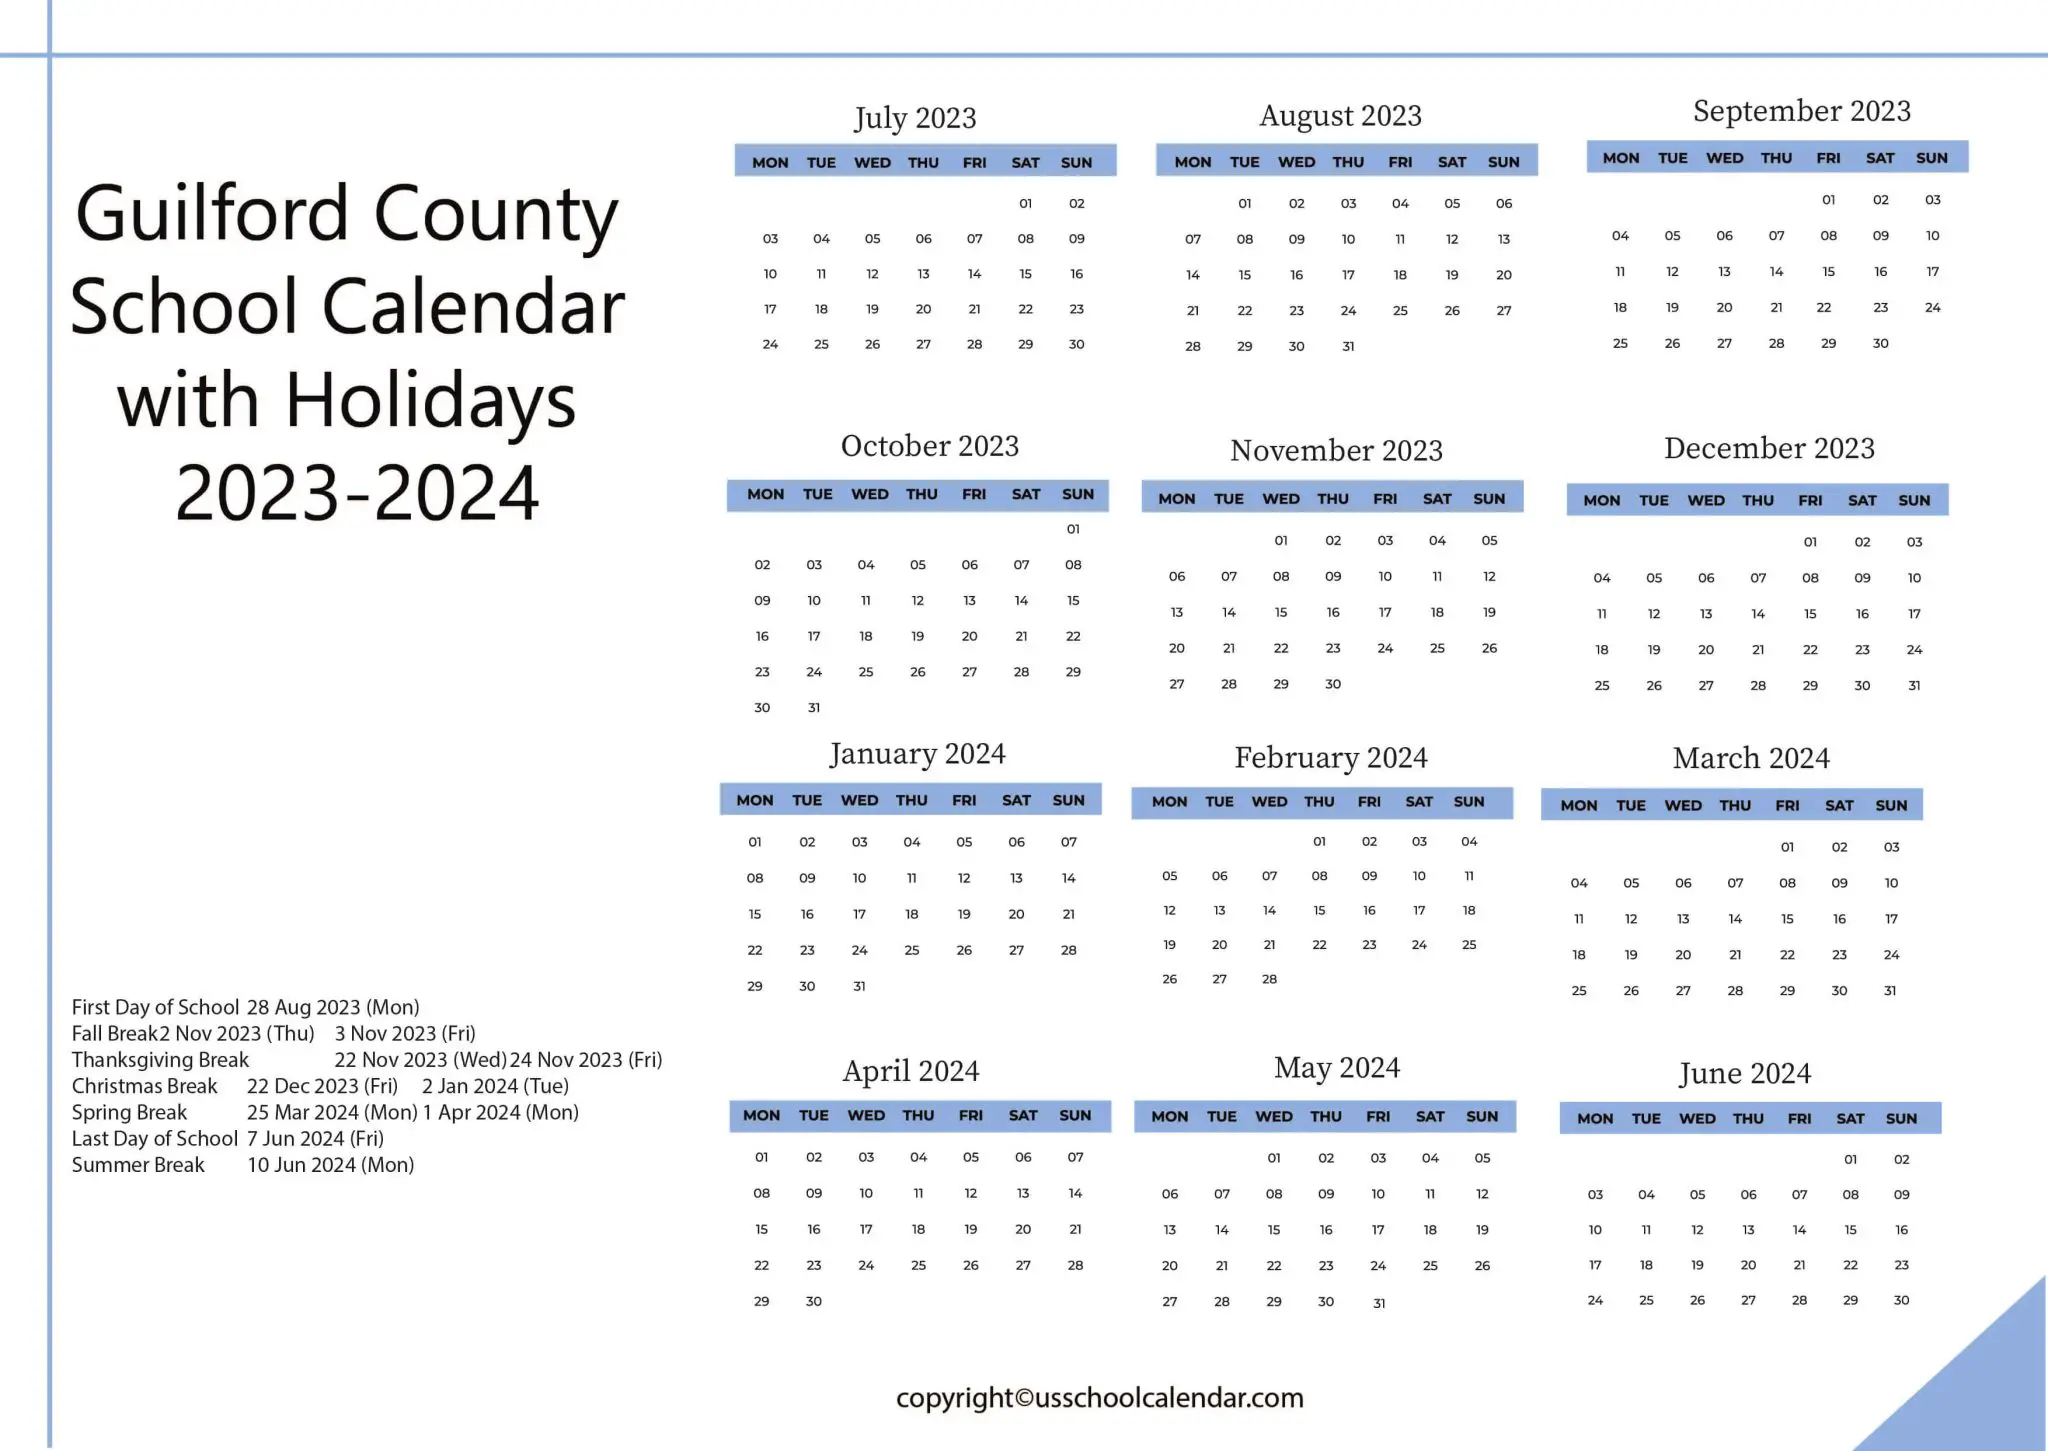 guilford-county-school-calendar-with-holidays-2023-2024